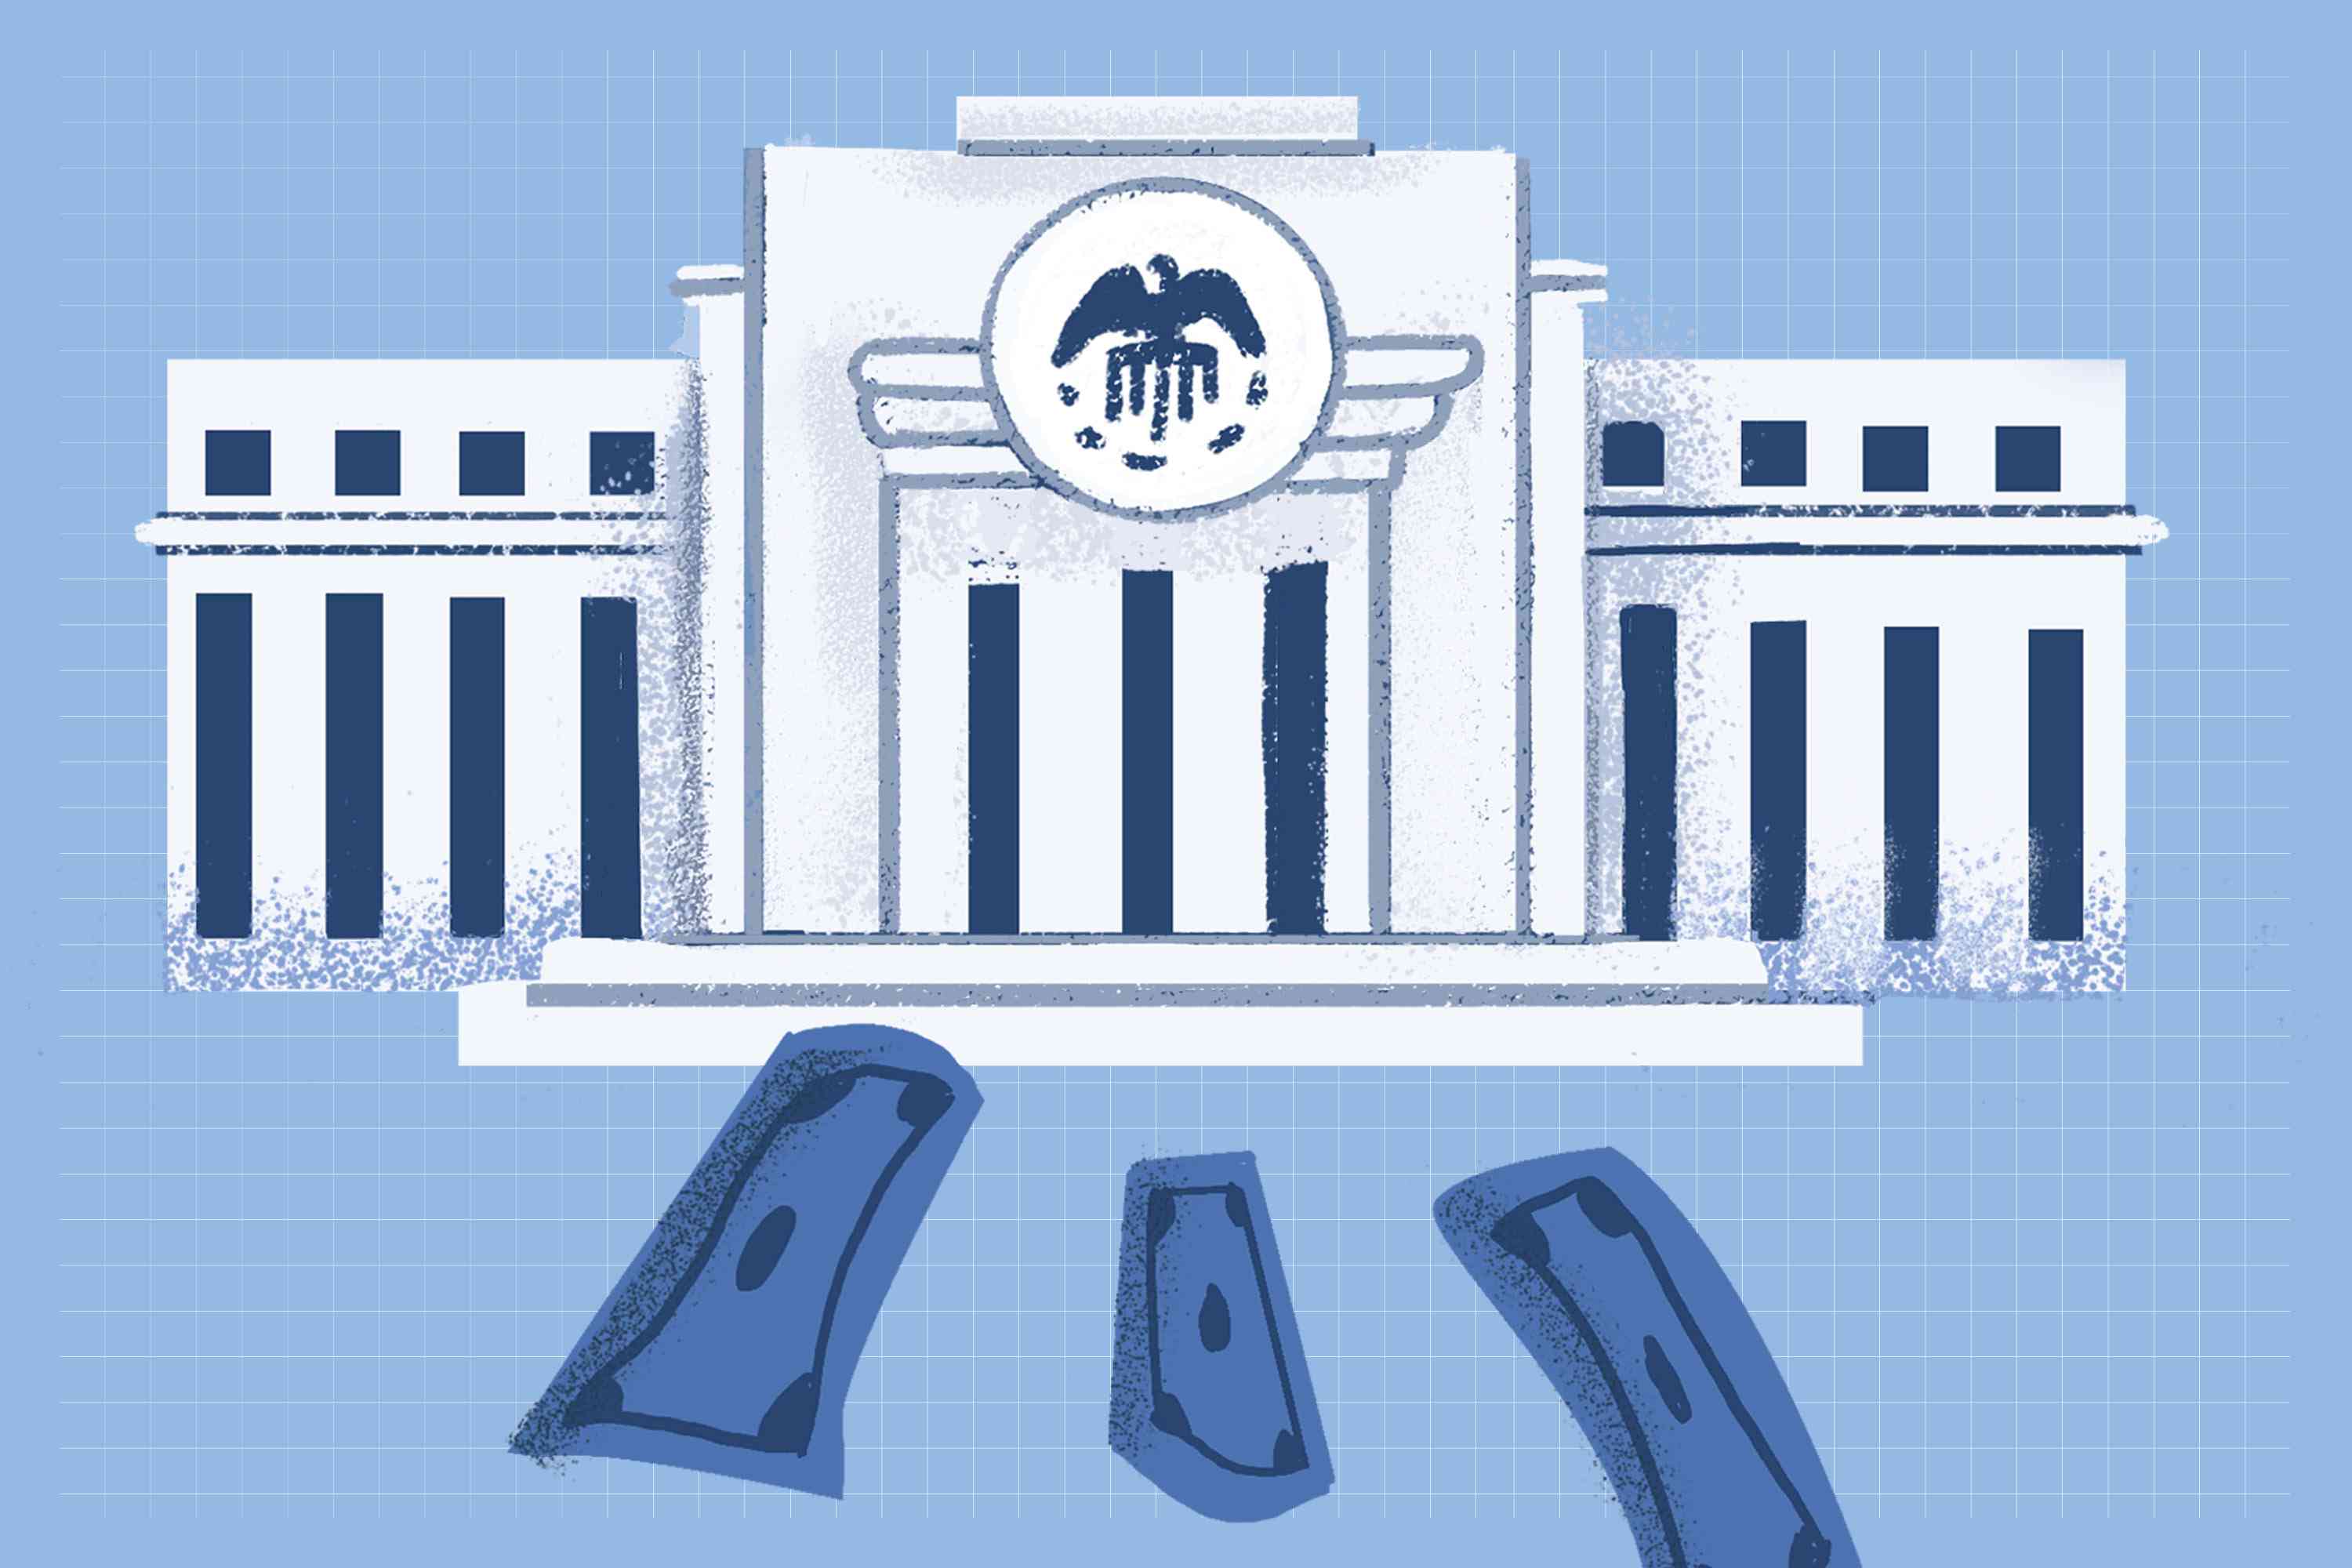 Custom illustration shows a government building in white with an eagle at the top on a blue background with three blue dollar bills at the bottom.